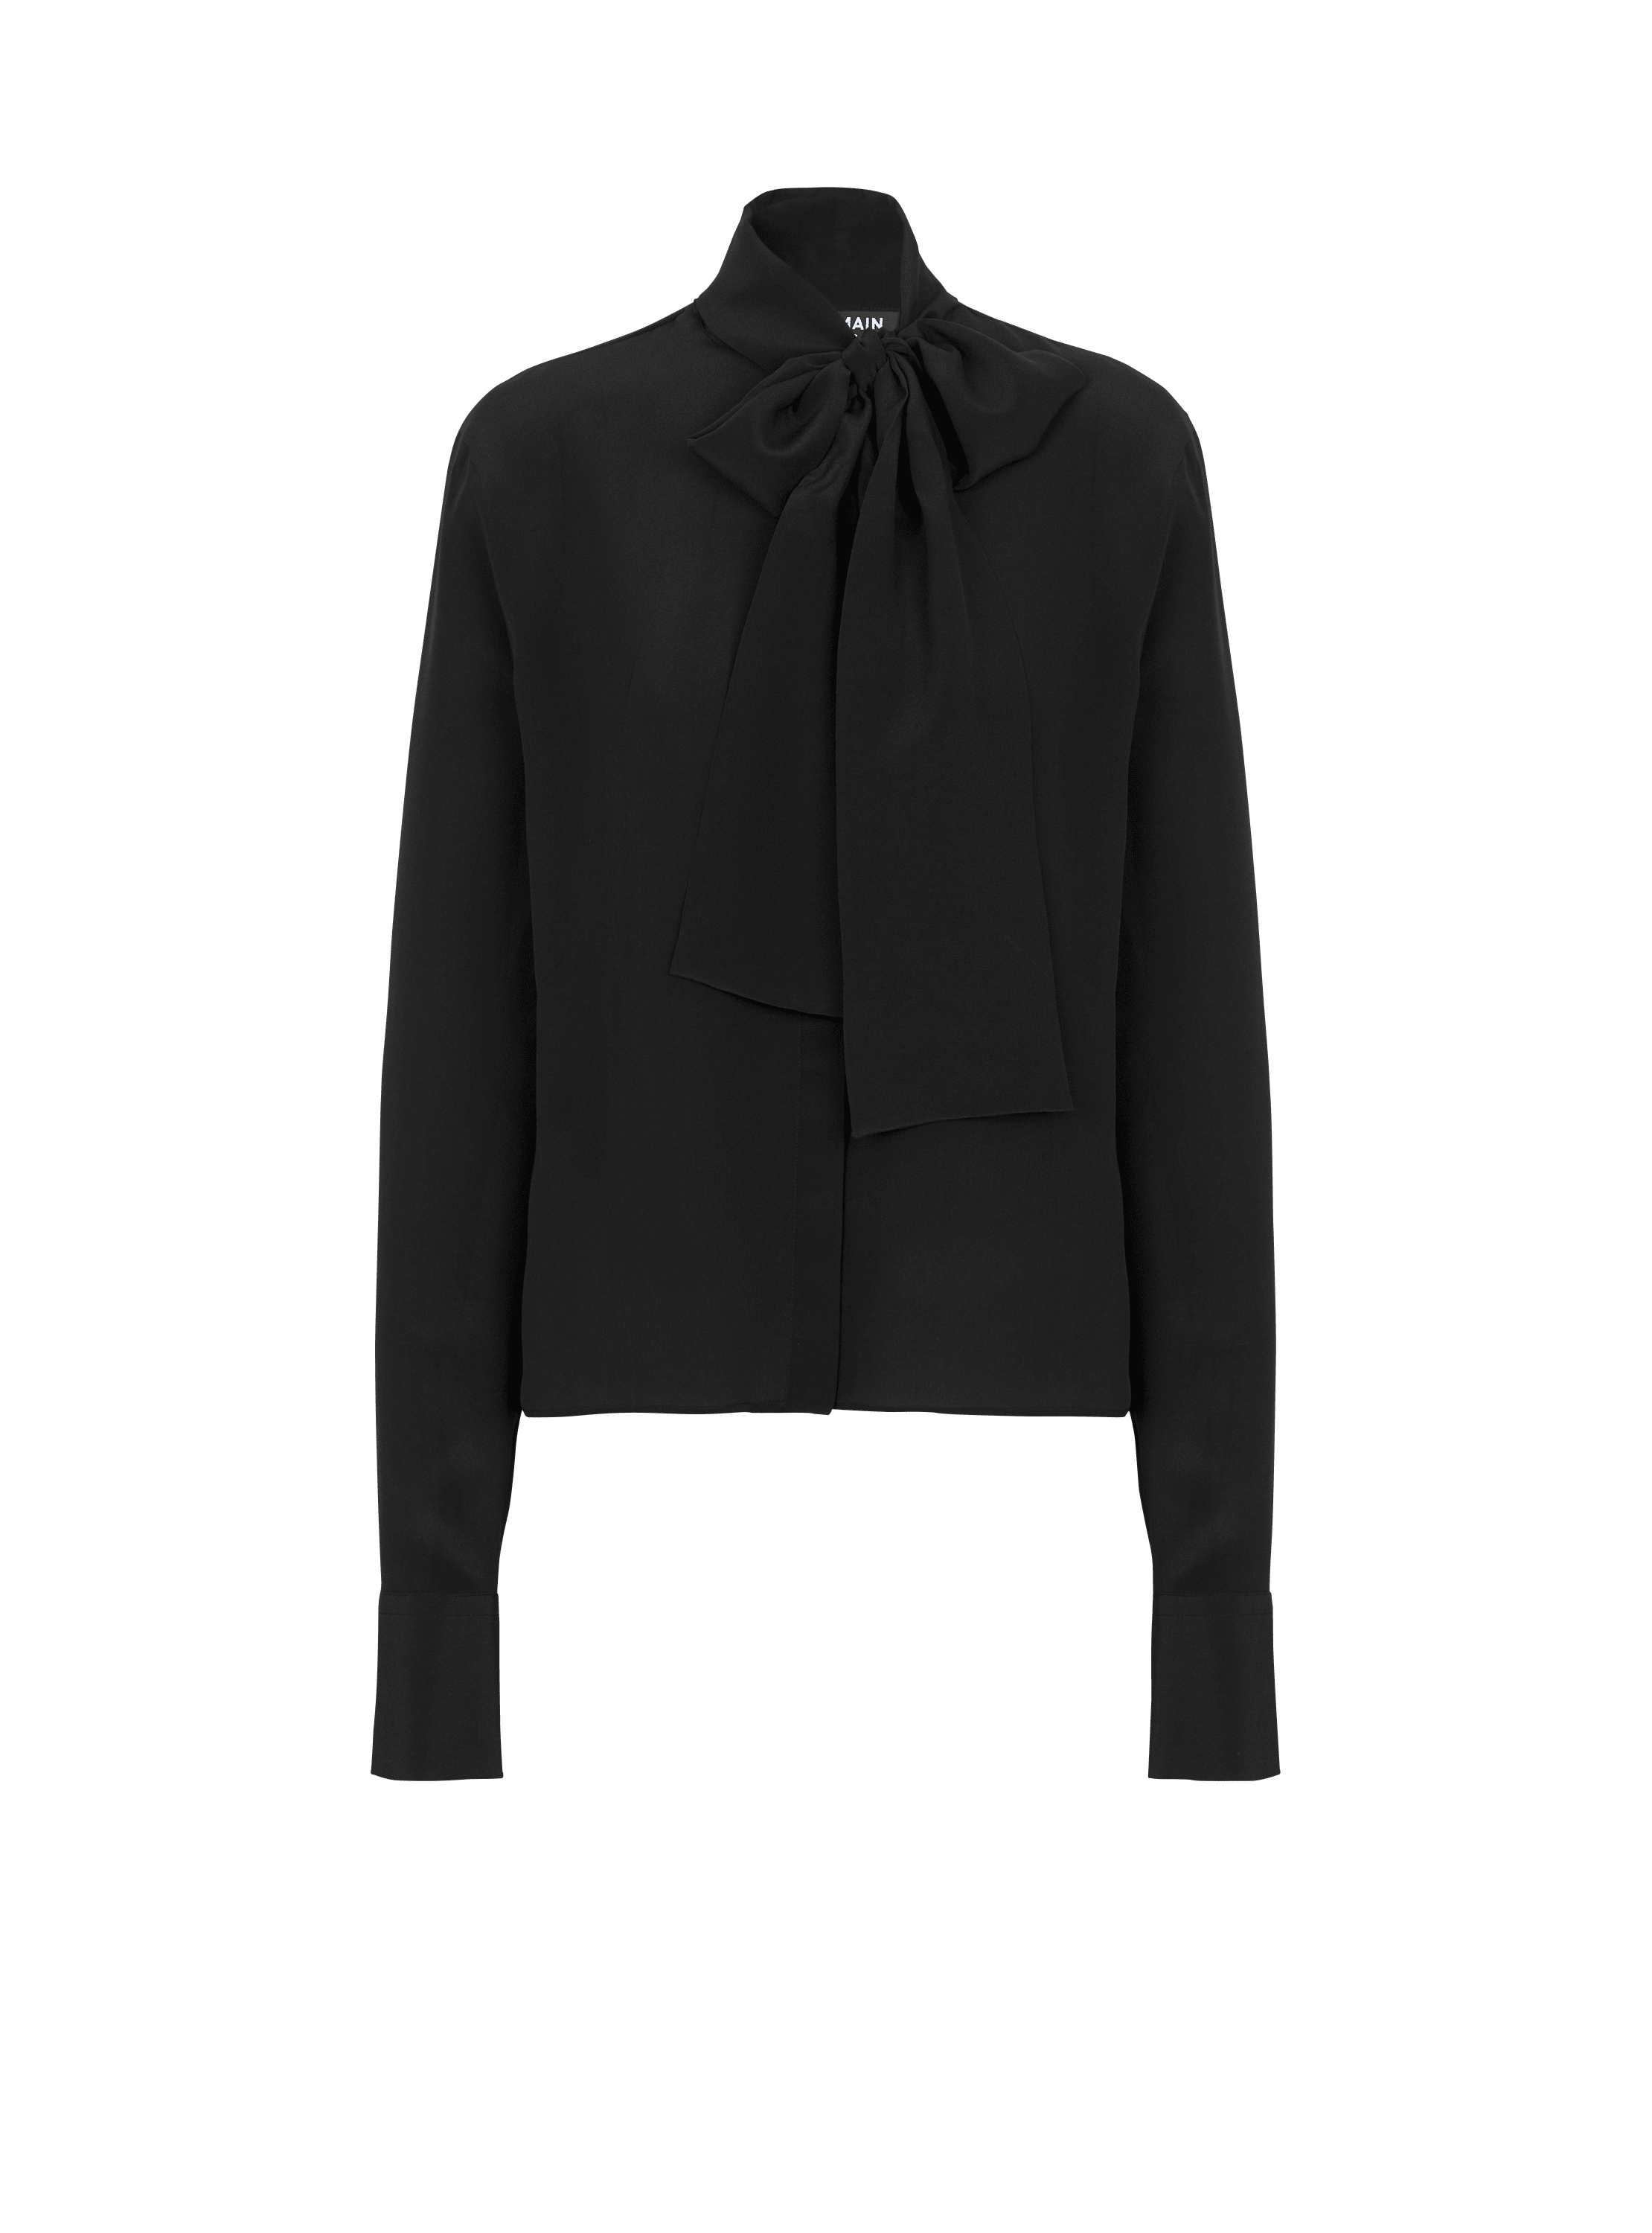 Crepe shirt with bow collar, black, hi-res